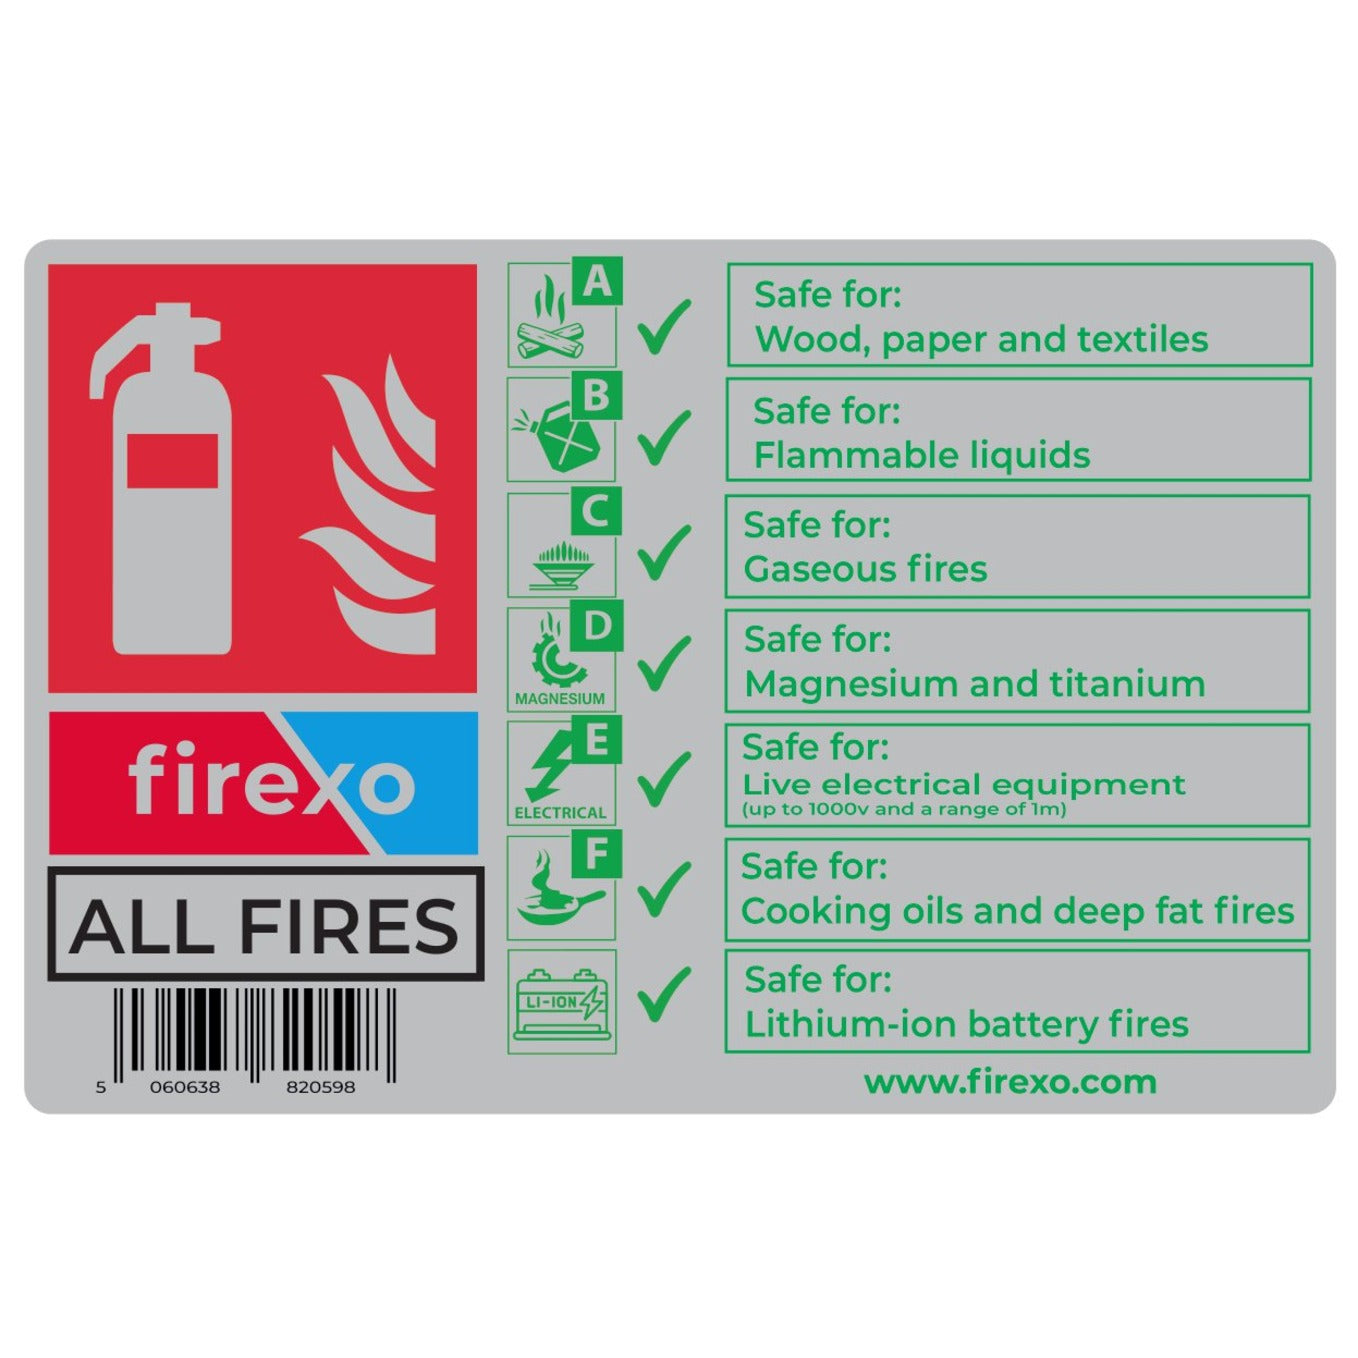 Firexo Brushed Steel Safety Sign - ALL FIRES Fire Extinguishers